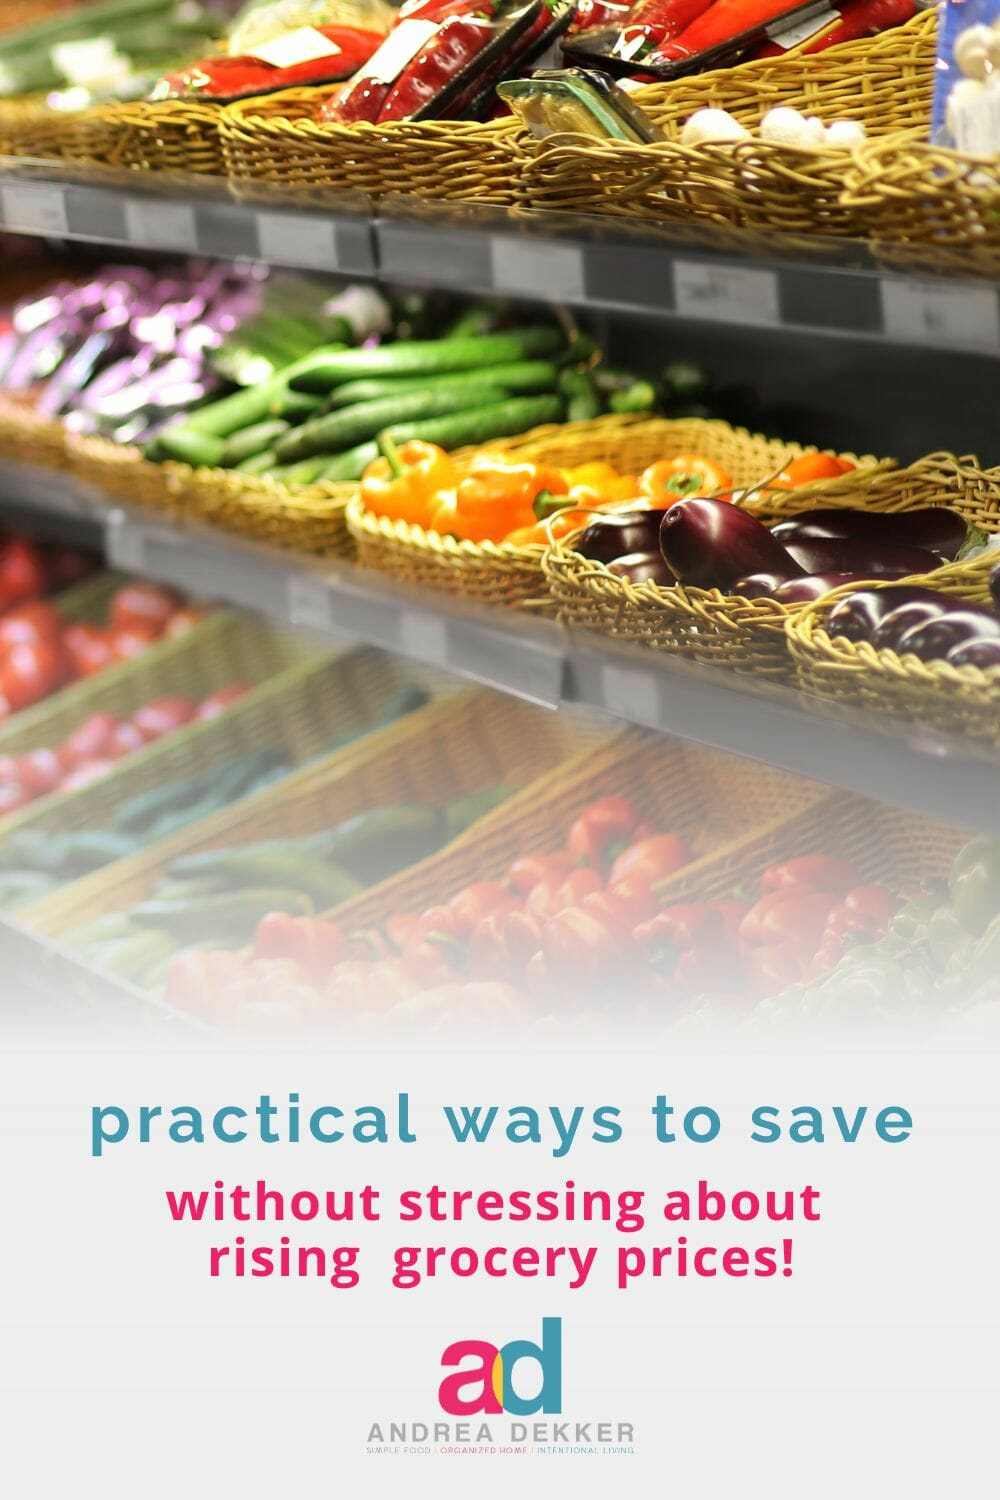 This simple, yet intentional, change in your perspective might just alleviate the stress and anxiety from your weekly grocery shopping! via @andreadekker